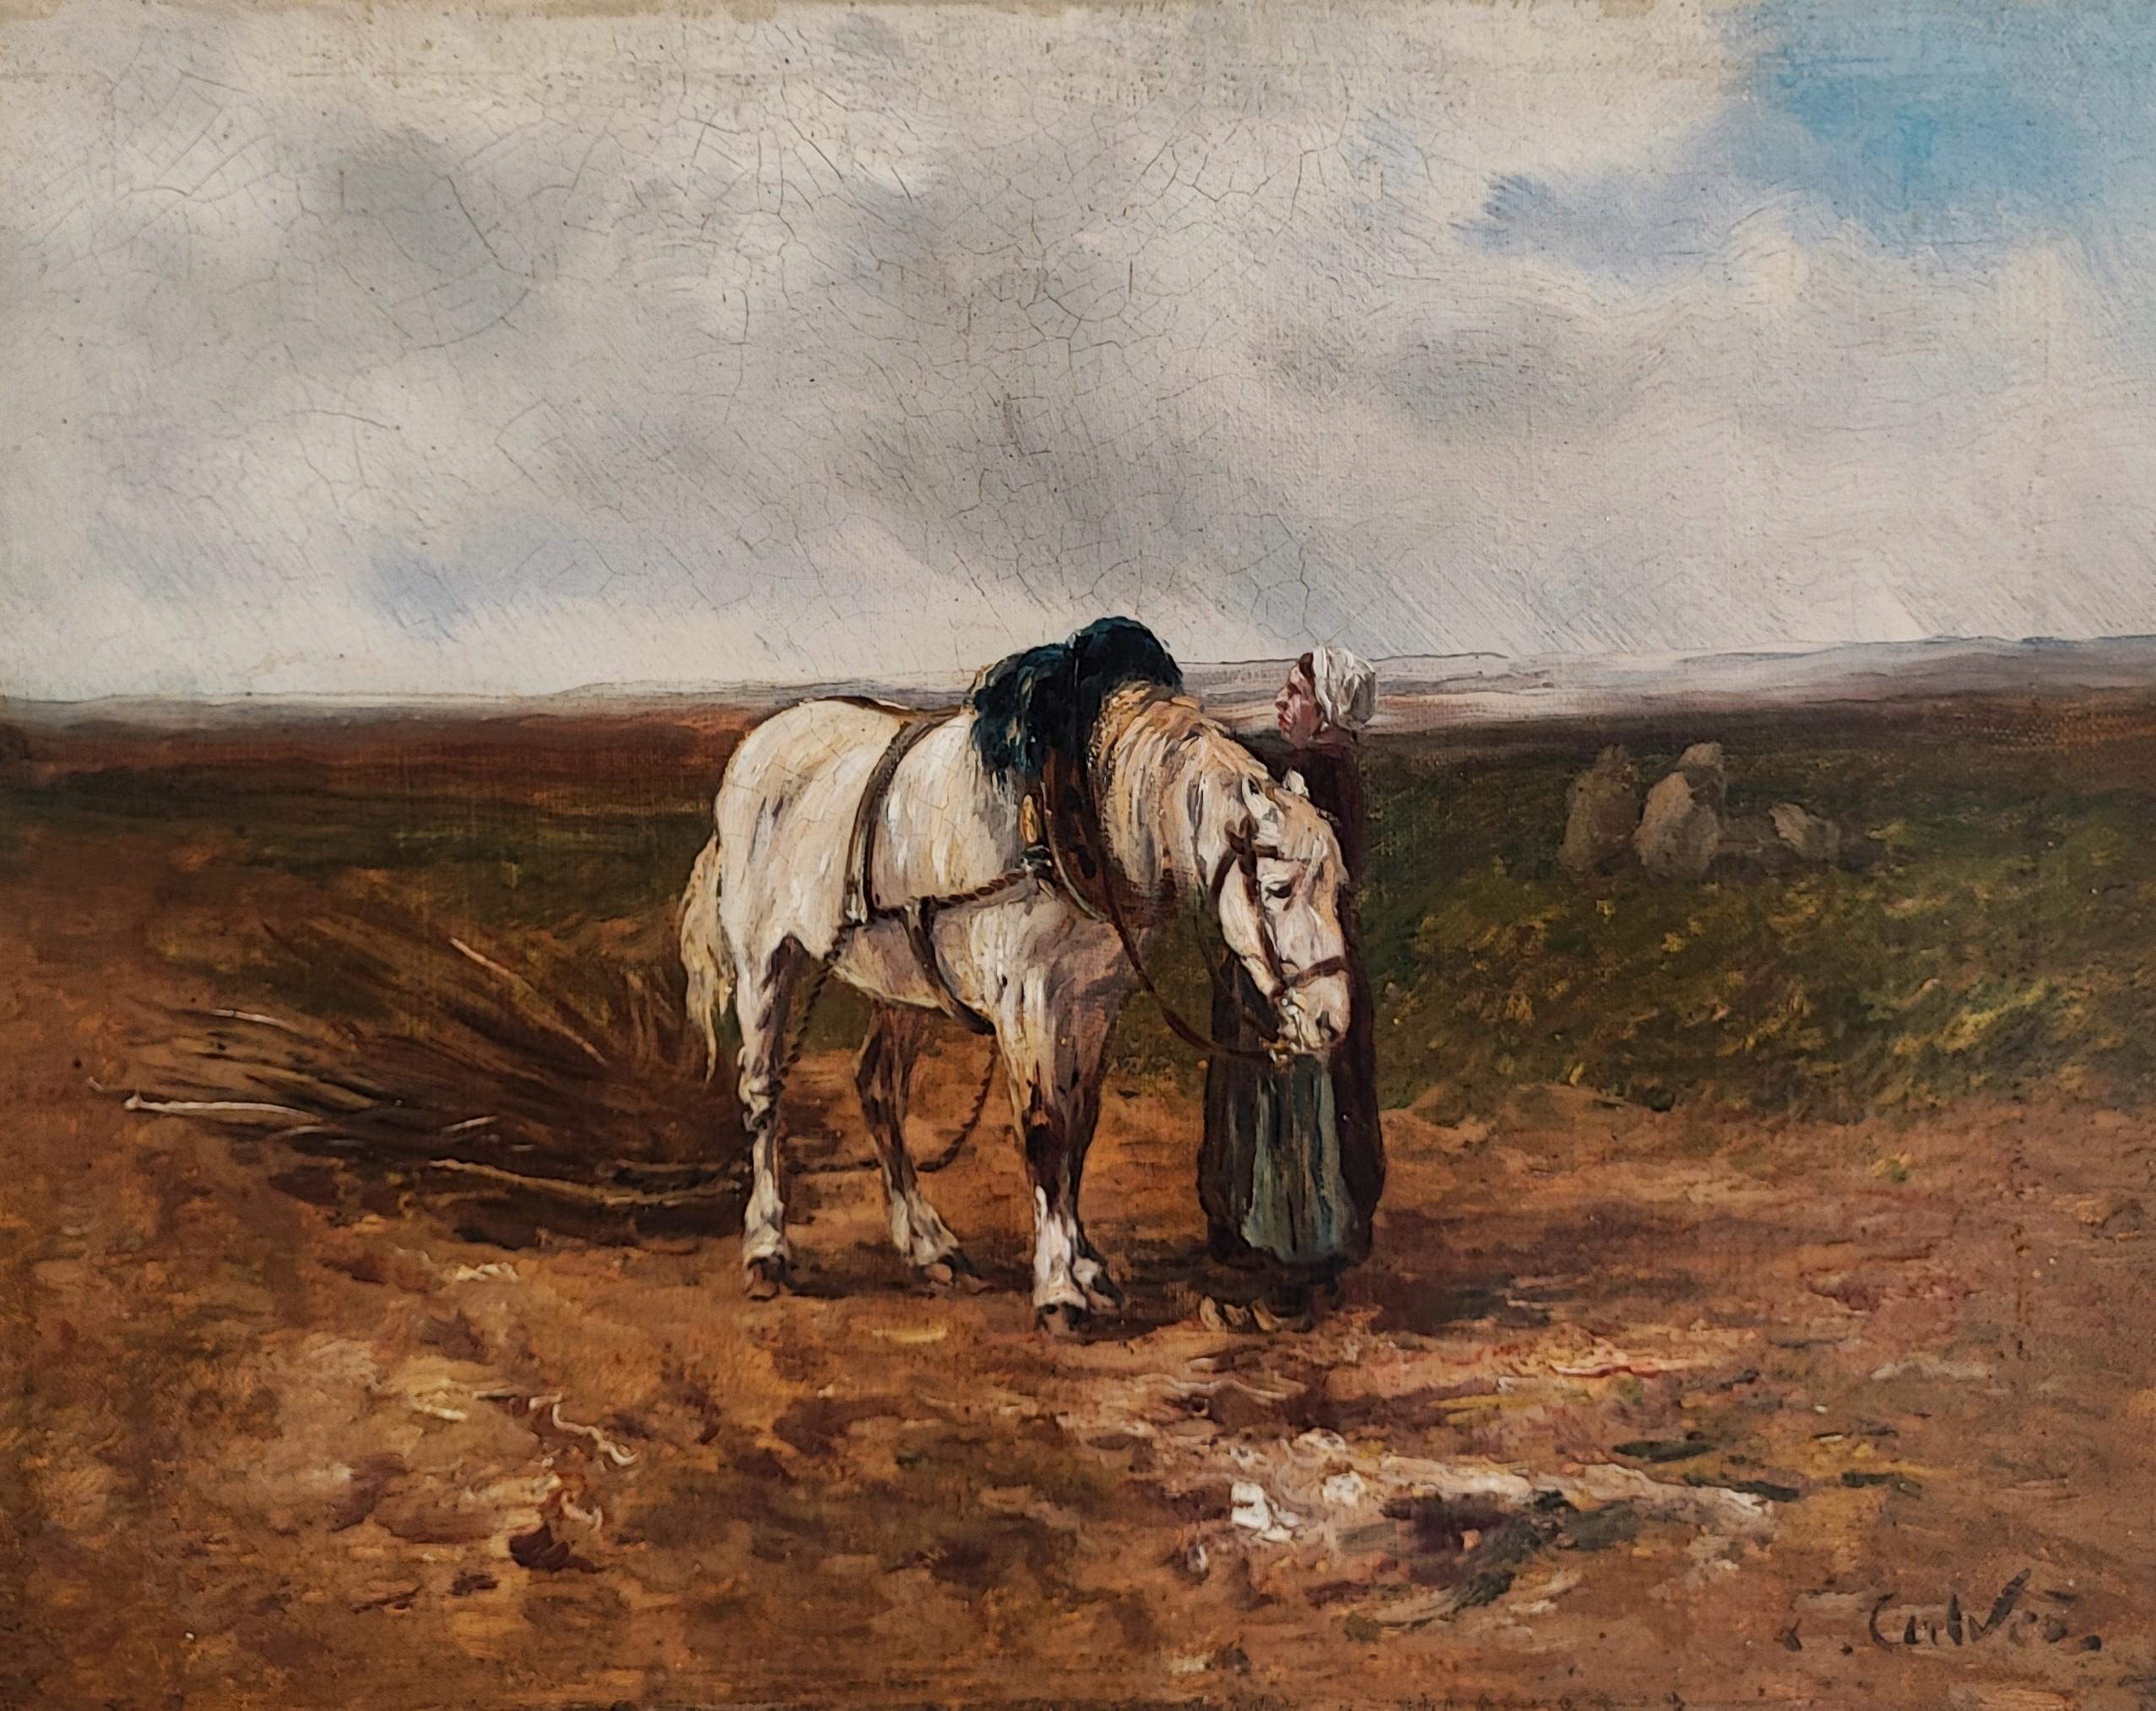 Woman in the field preparing a draft horse